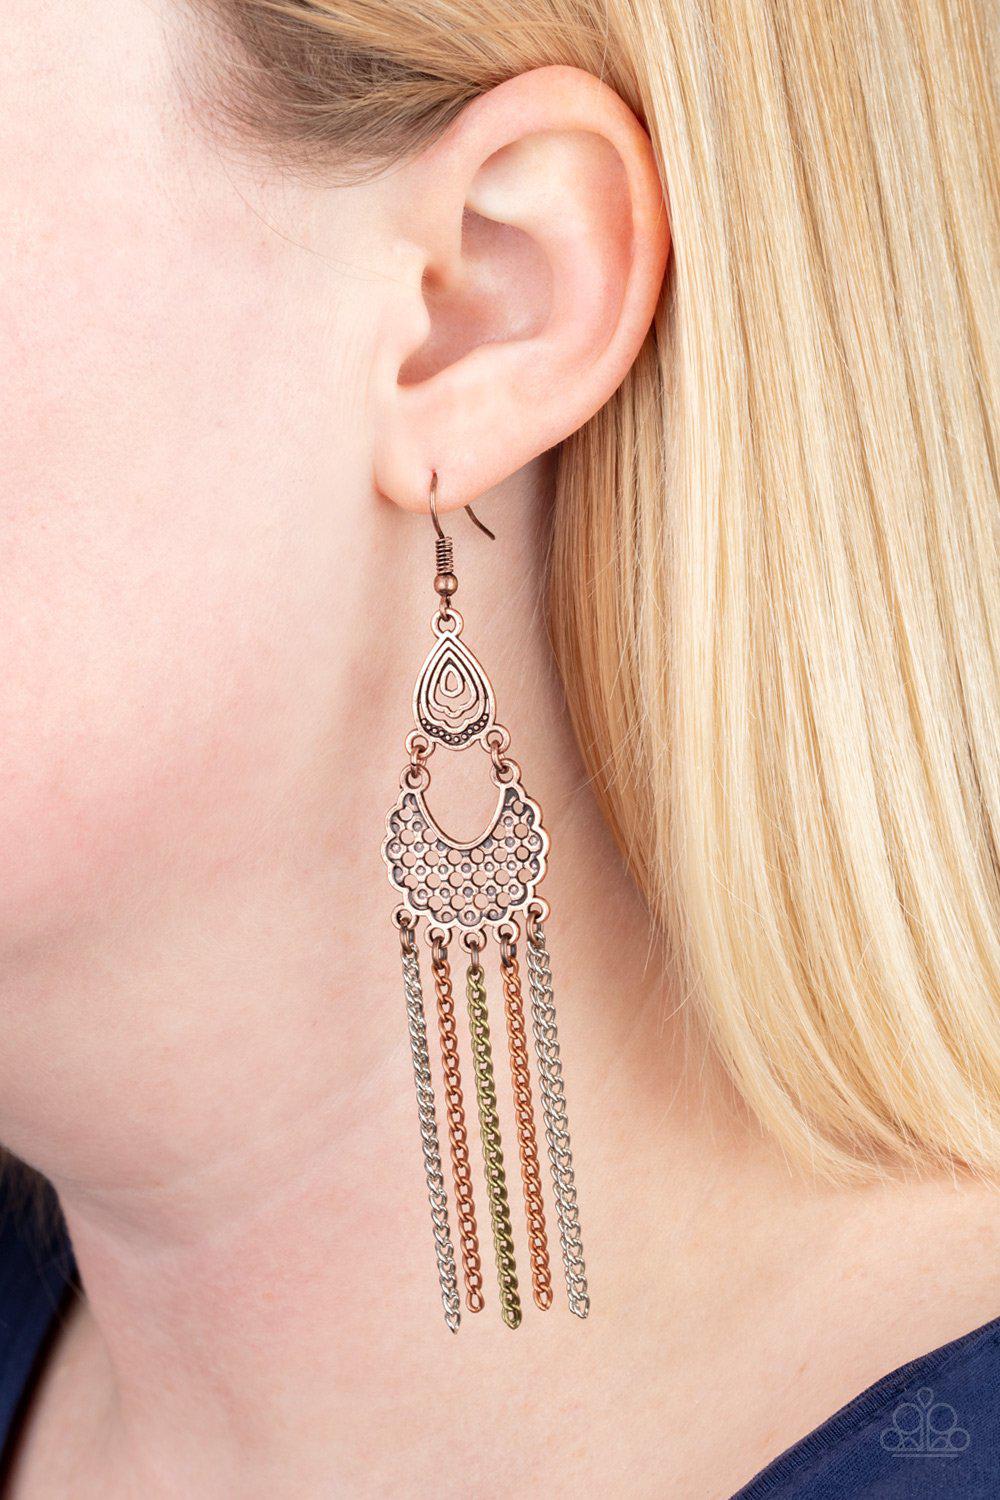 Insane Chain Multi Copper, Silver and Brass Chain Fringe Earrings - Paparazzi Accessories-CarasShop.com - $5 Jewelry by Cara Jewels